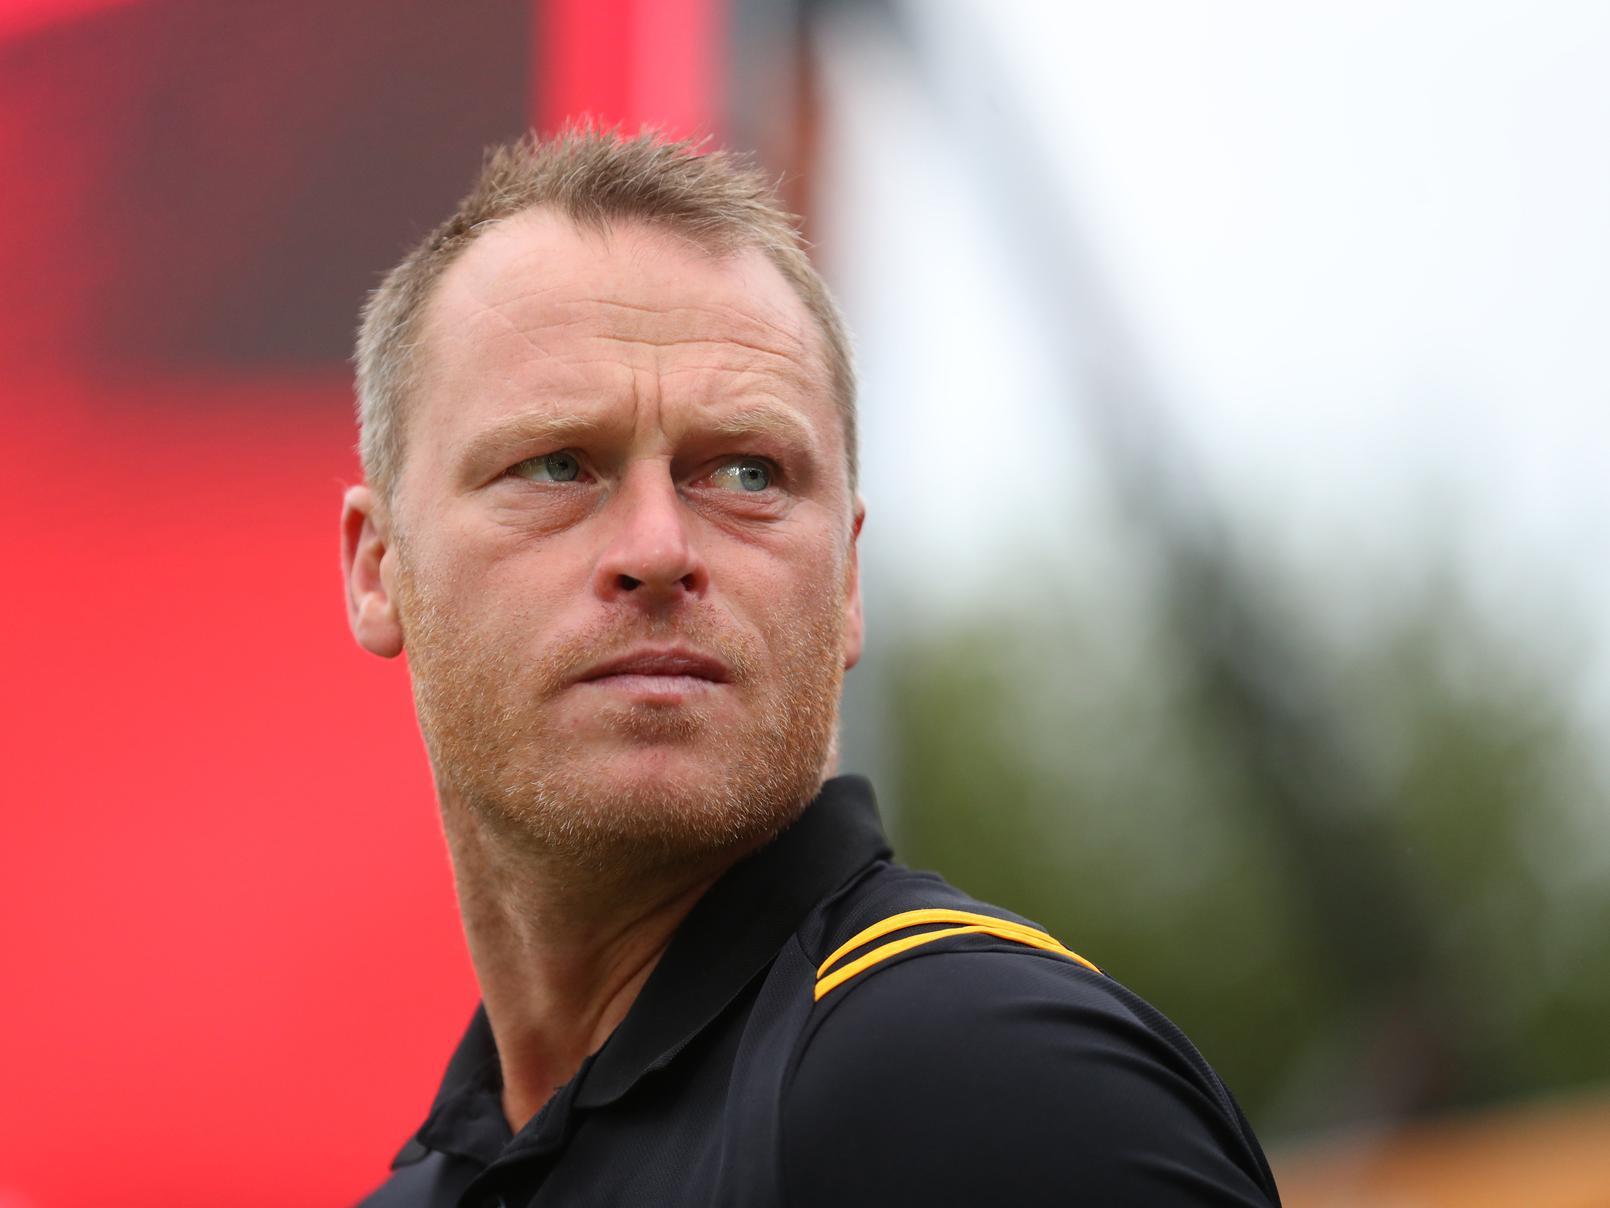 Welshman who turned out for Newport, Wigan, Gillingham, Huddersfield and Bradford in 20-year playing career. Has managed Newport since 2017 and is contracted until June 2022